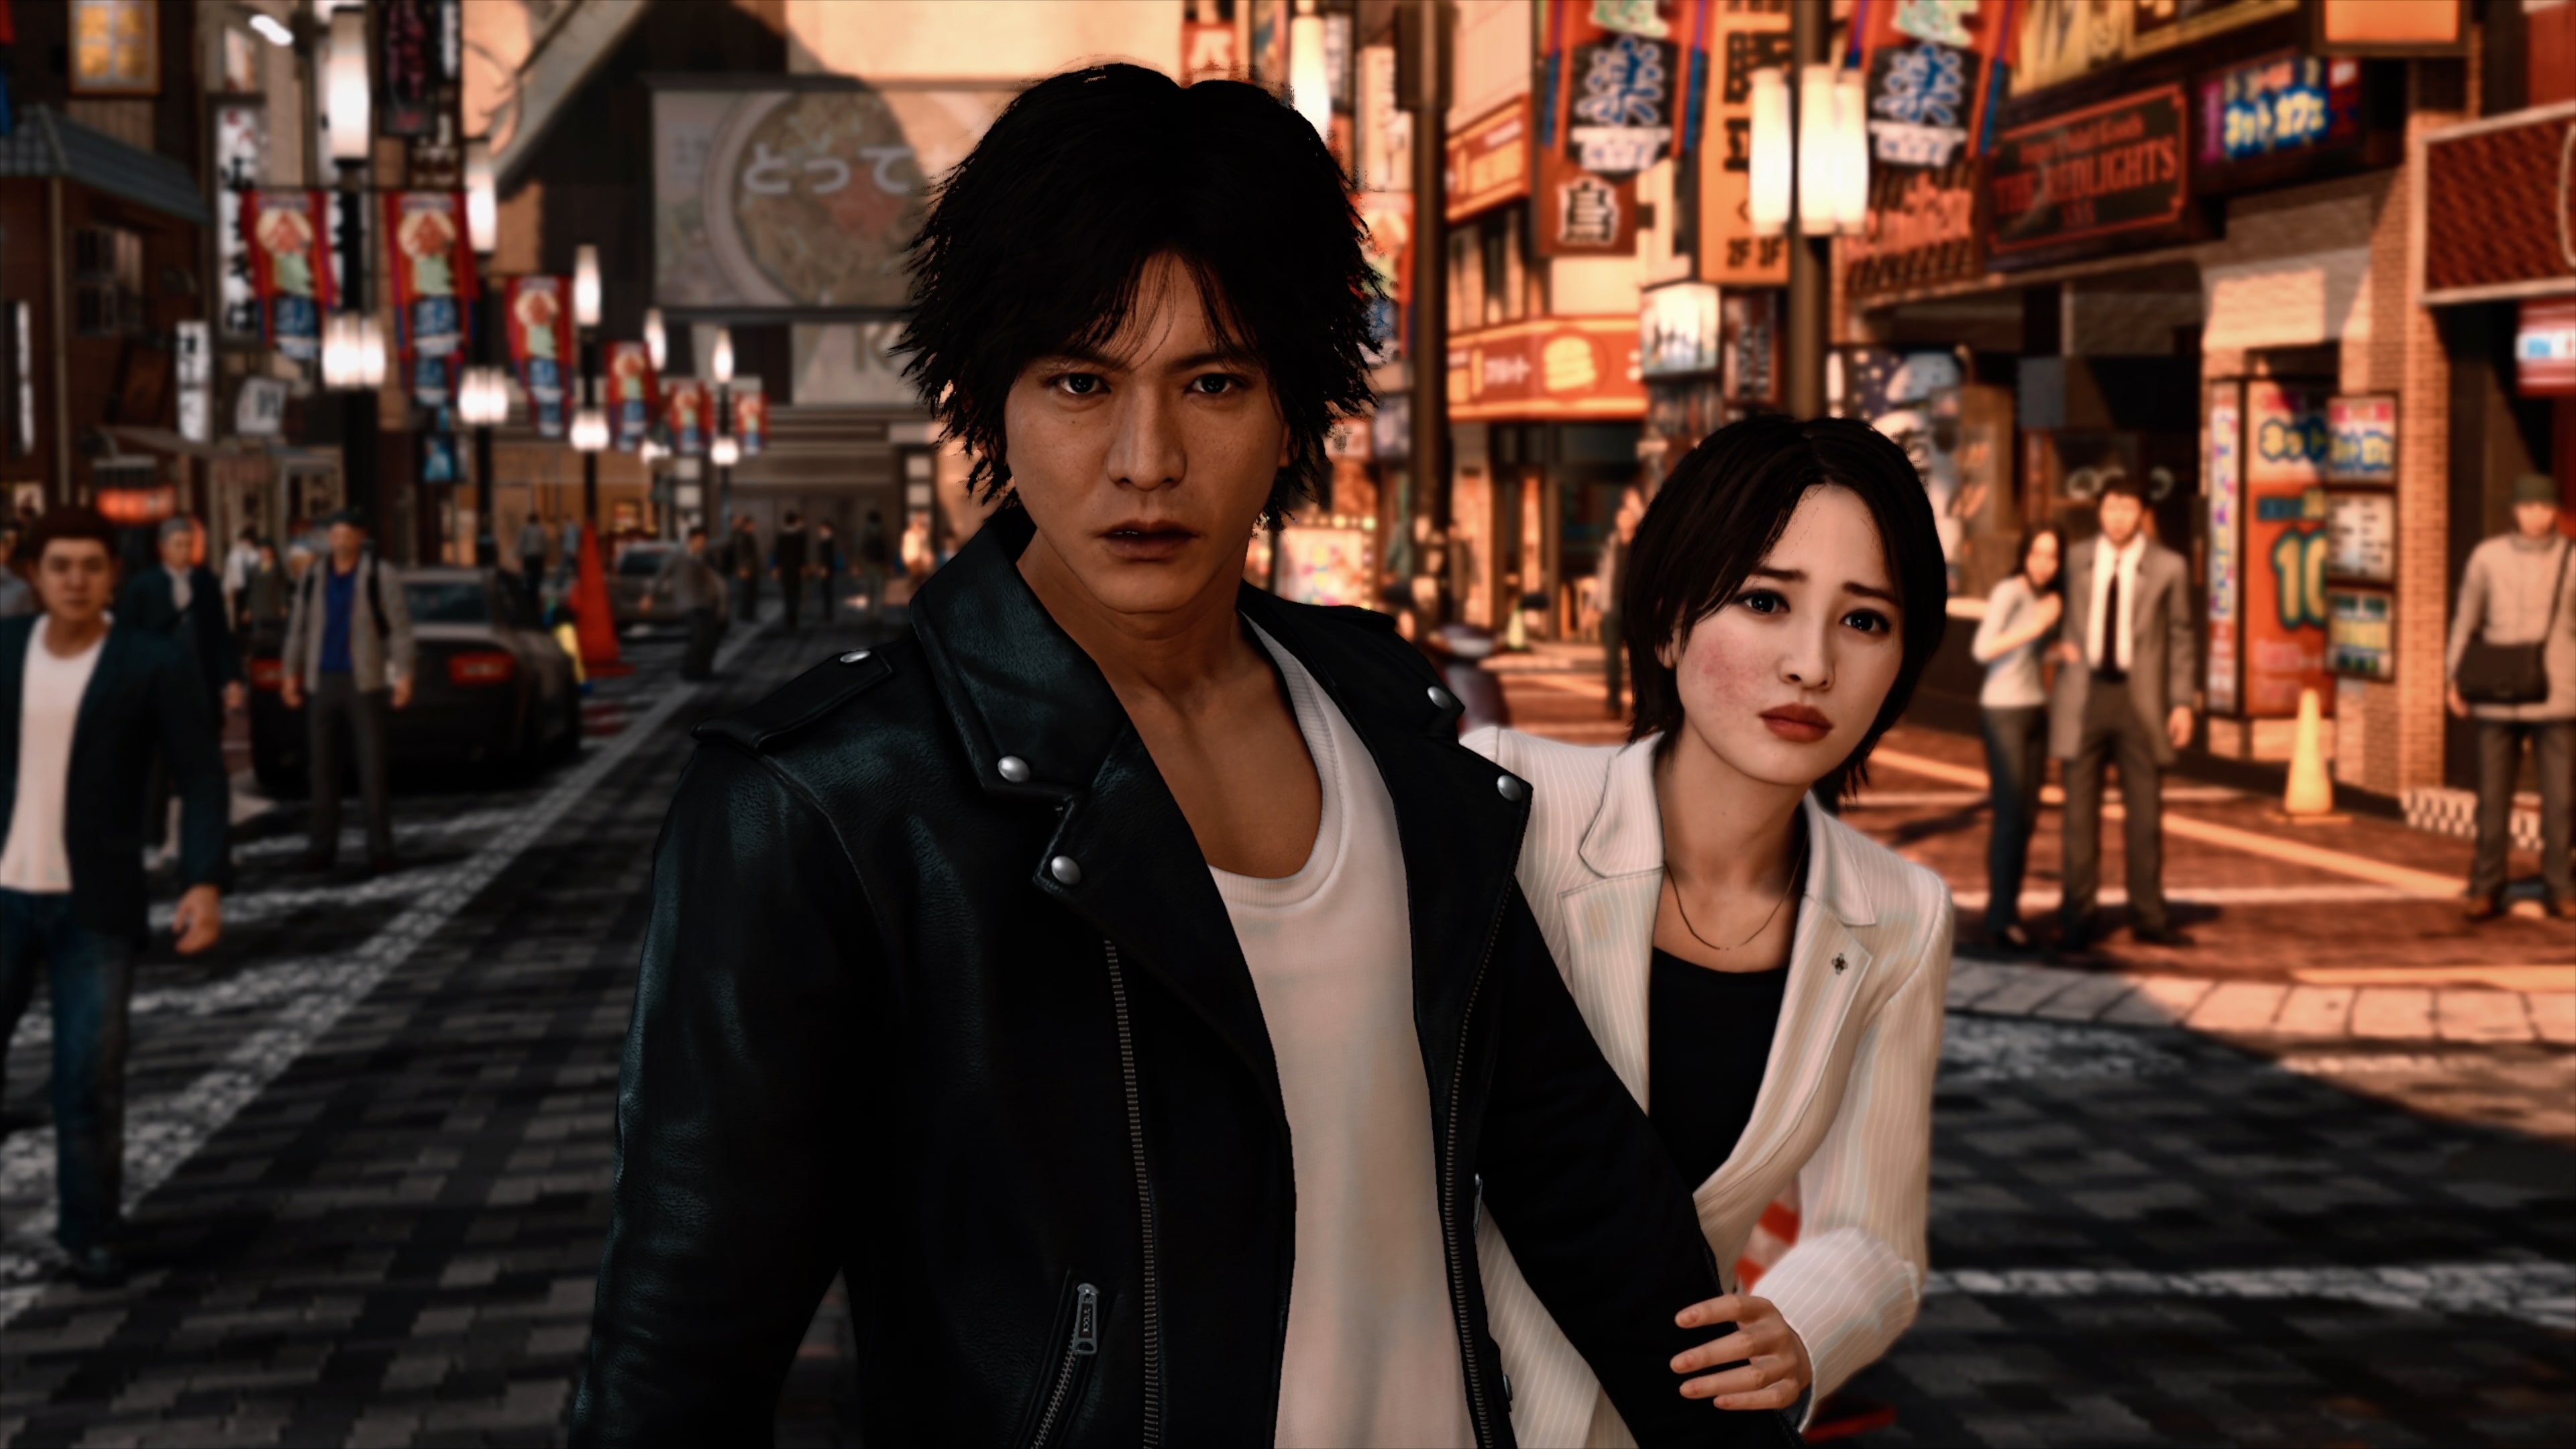 Judgment PS5 Game, Best Price